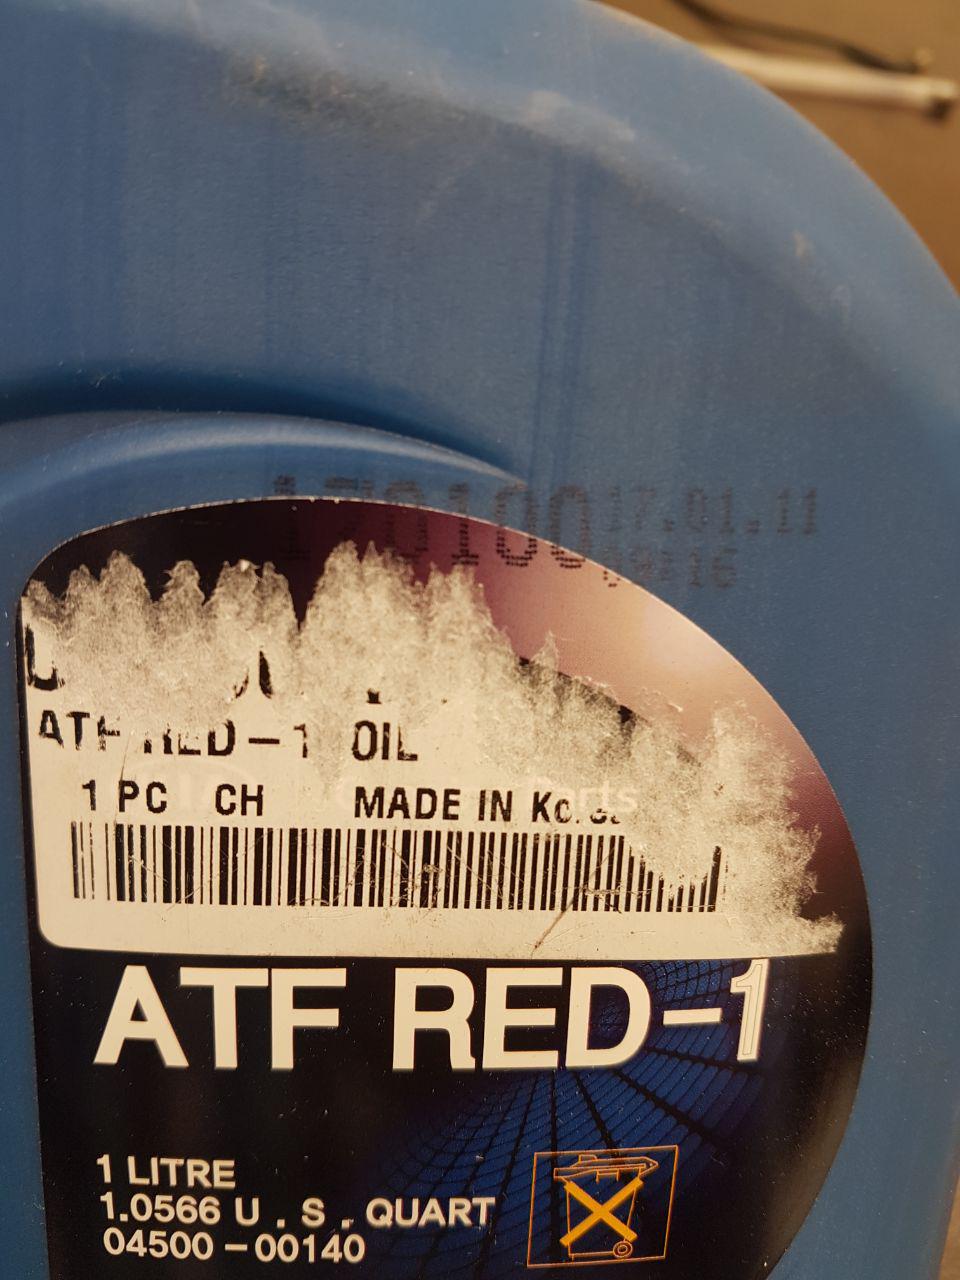 Atf red